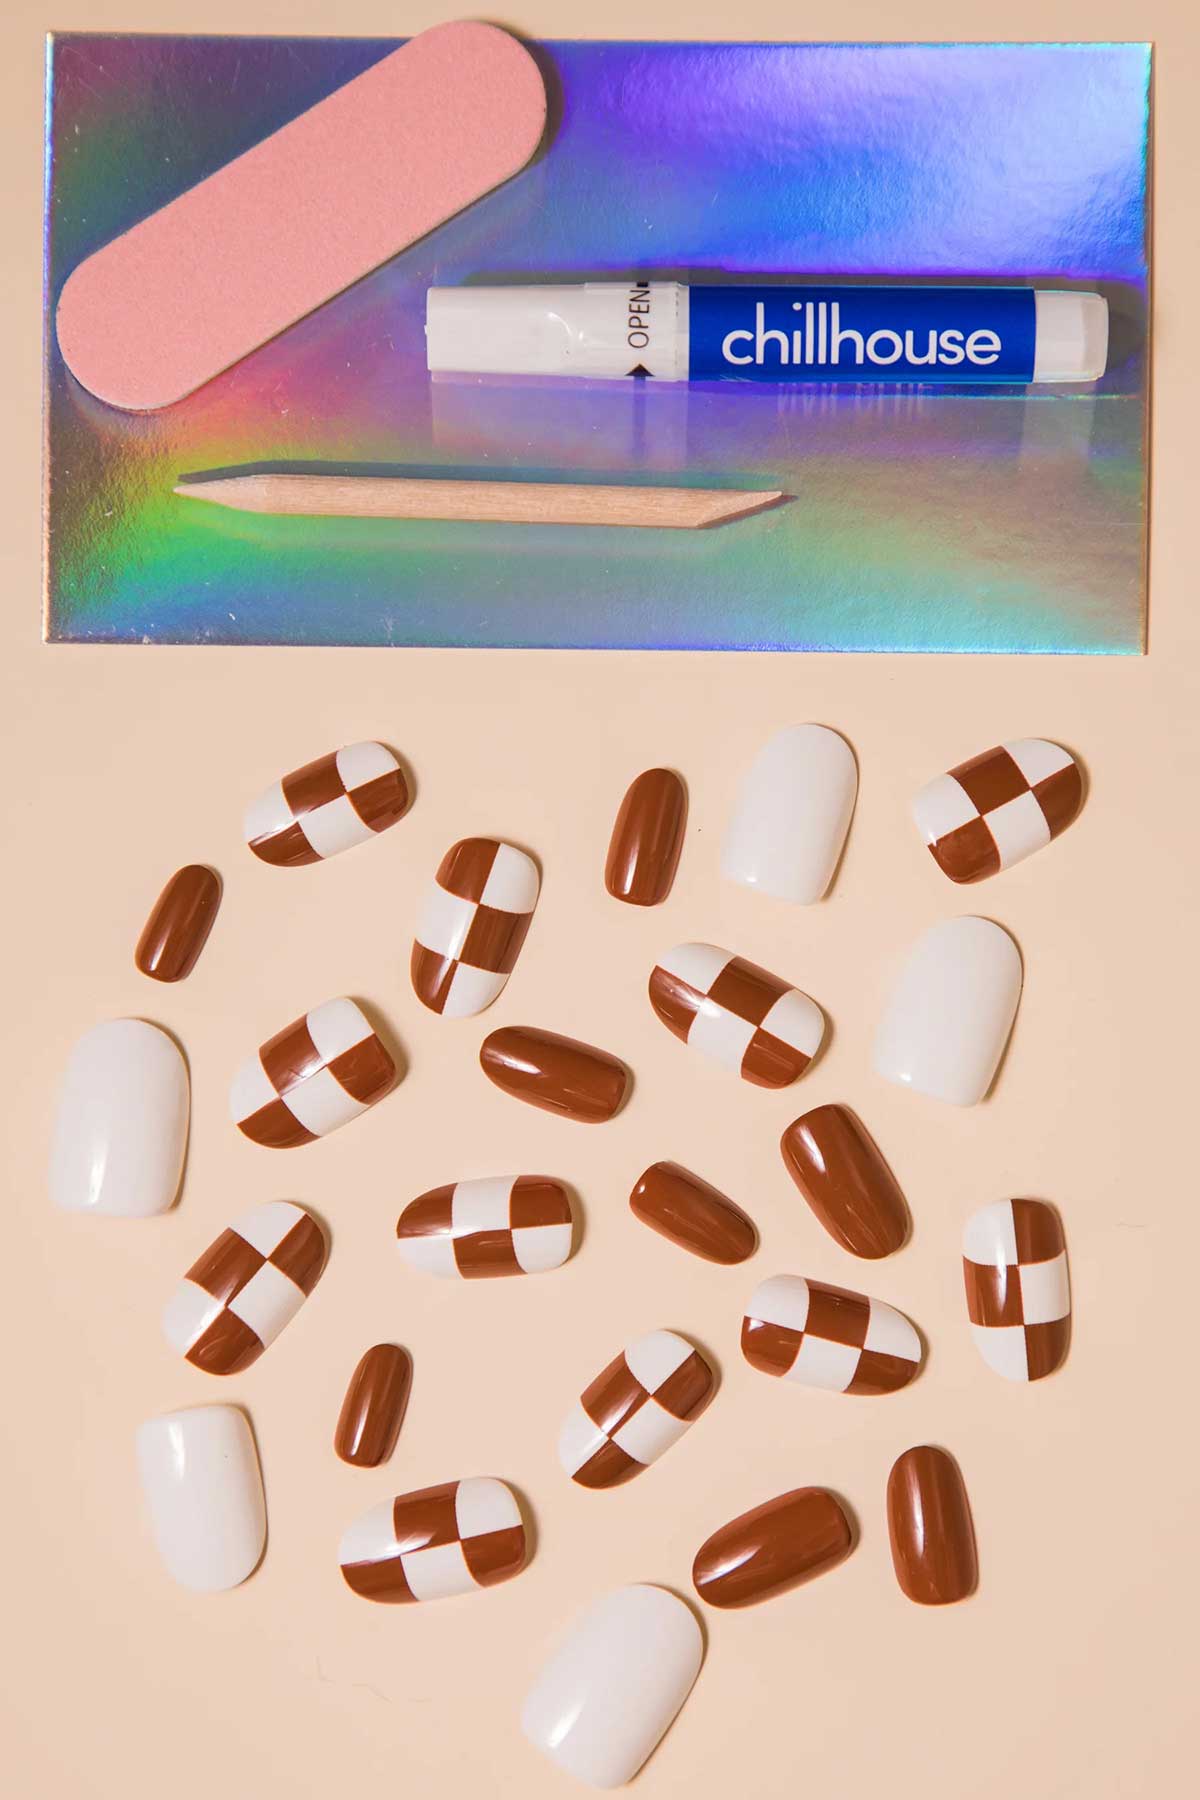 Chillhouse - Chill Tips - Want S'more - Contents